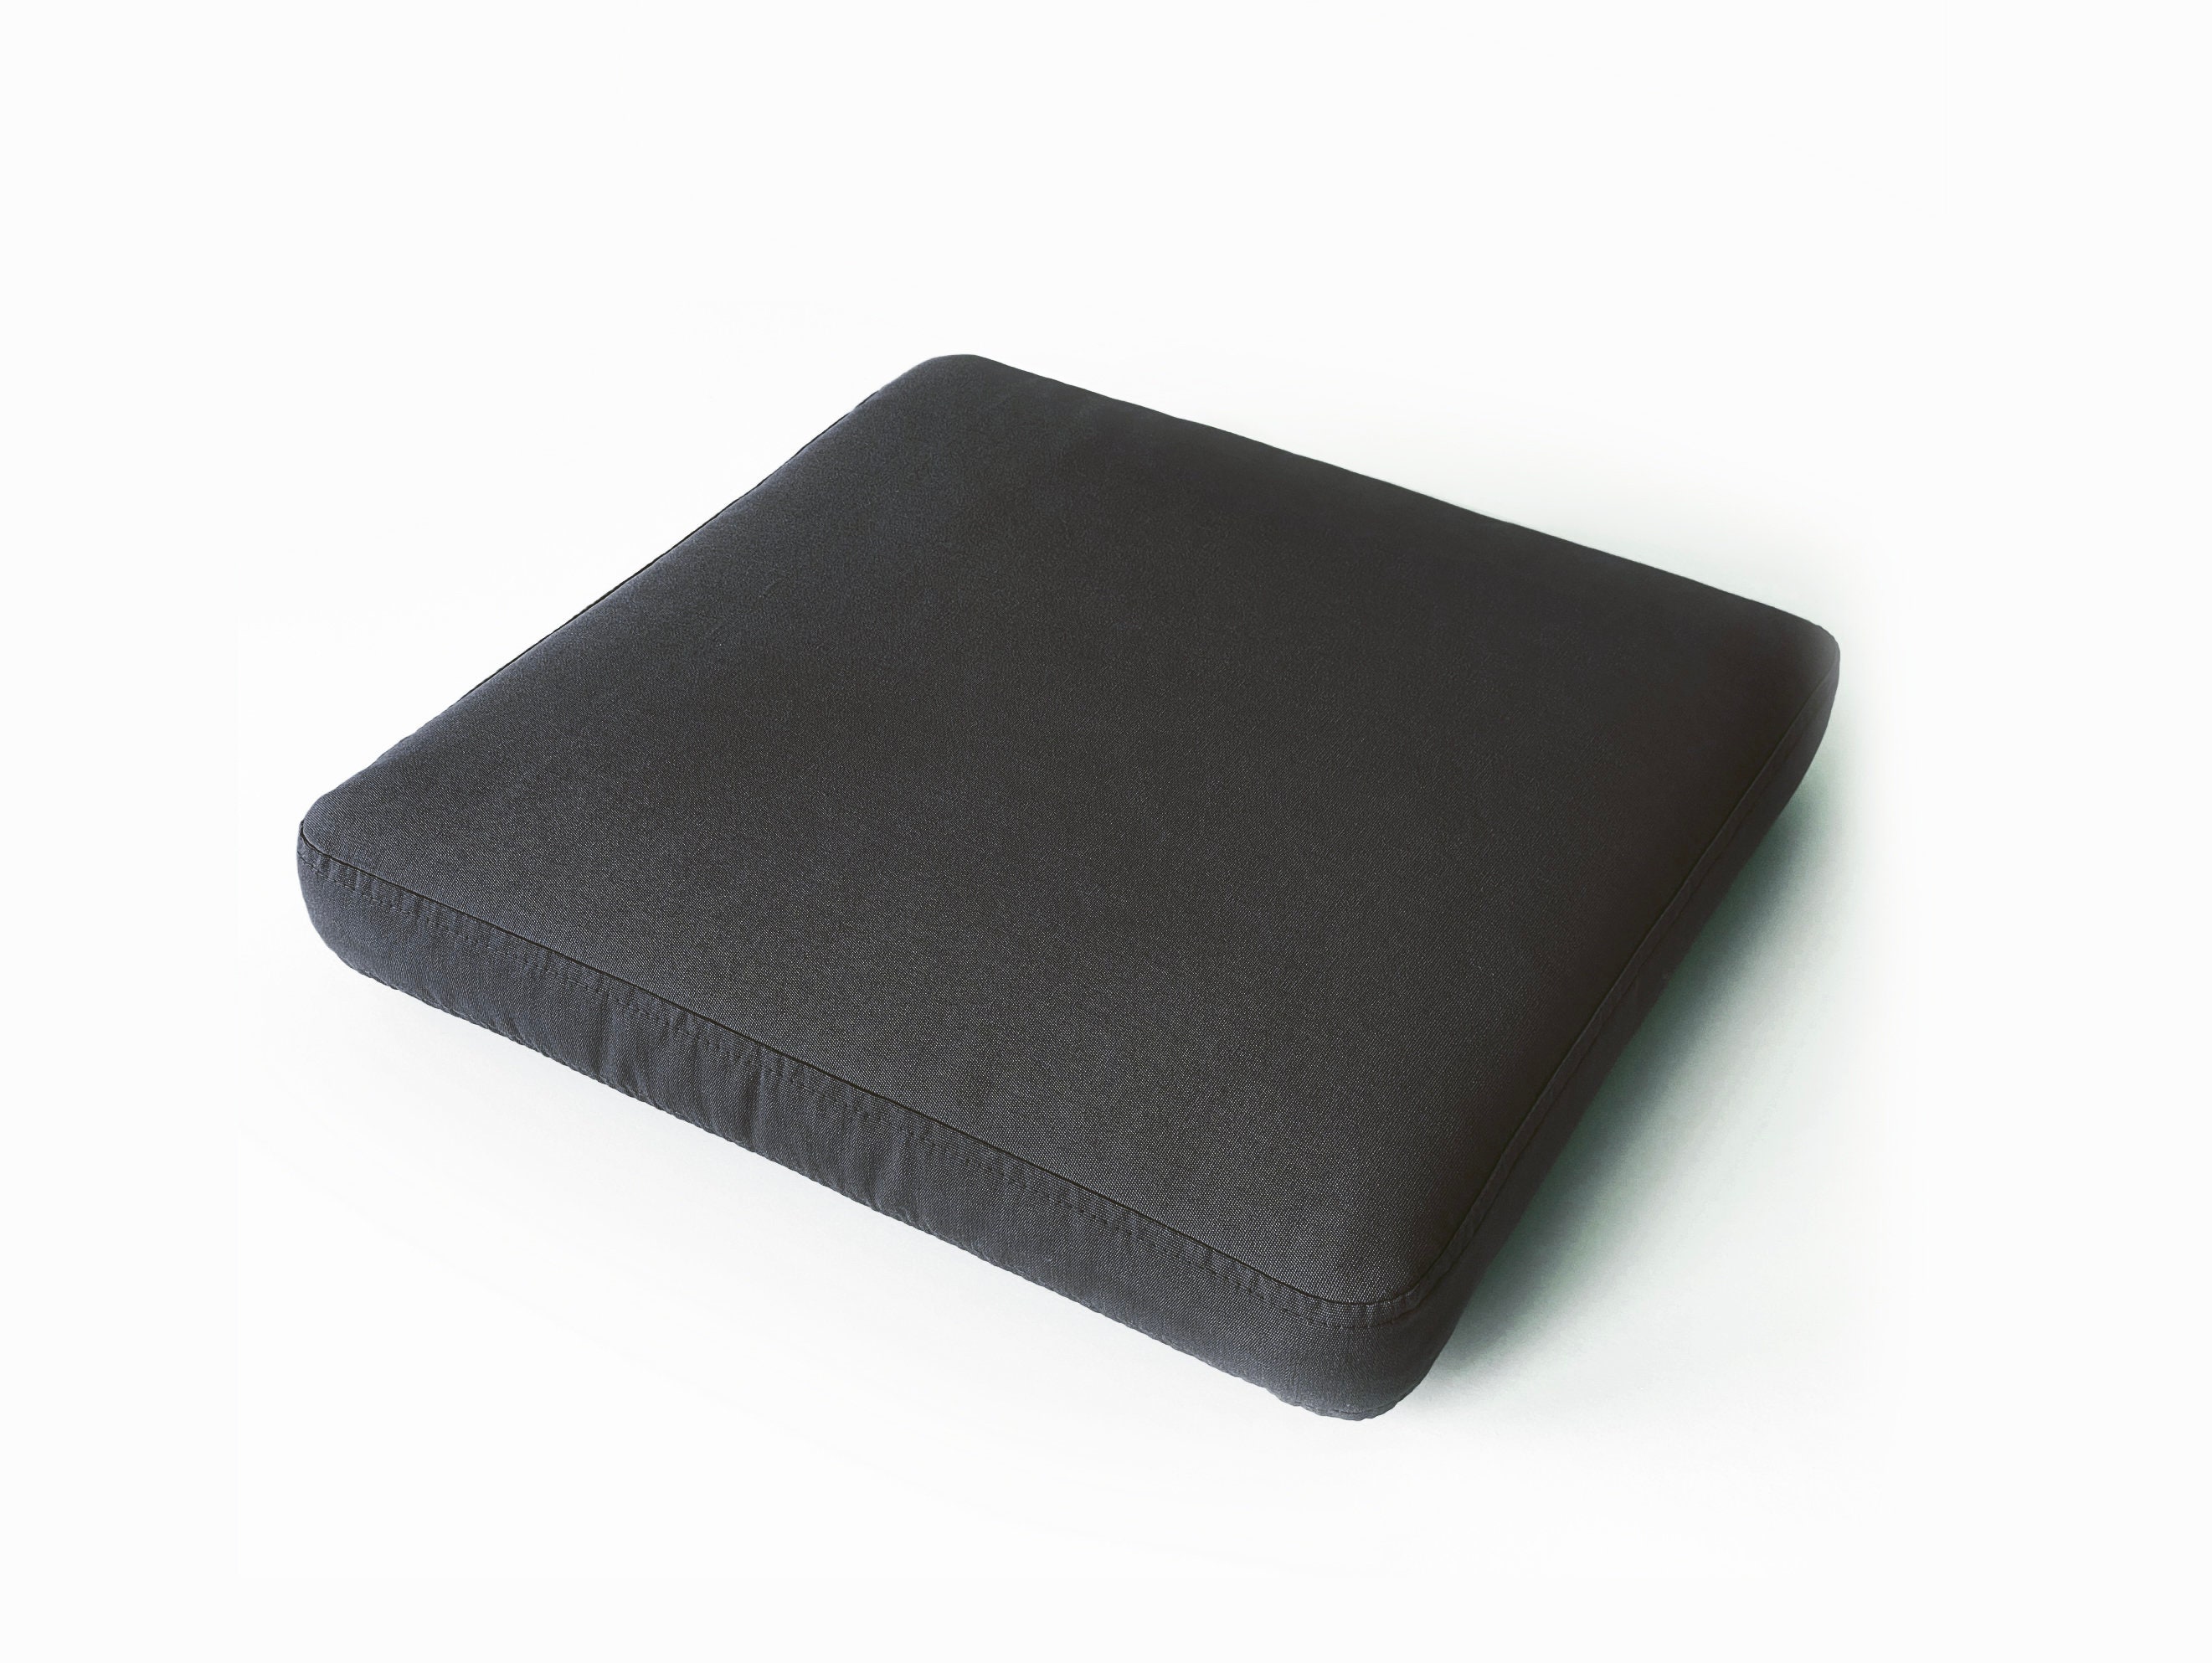 Fox Valley Traders Extra Thick Foam Cushion - Large by LivingSURETM